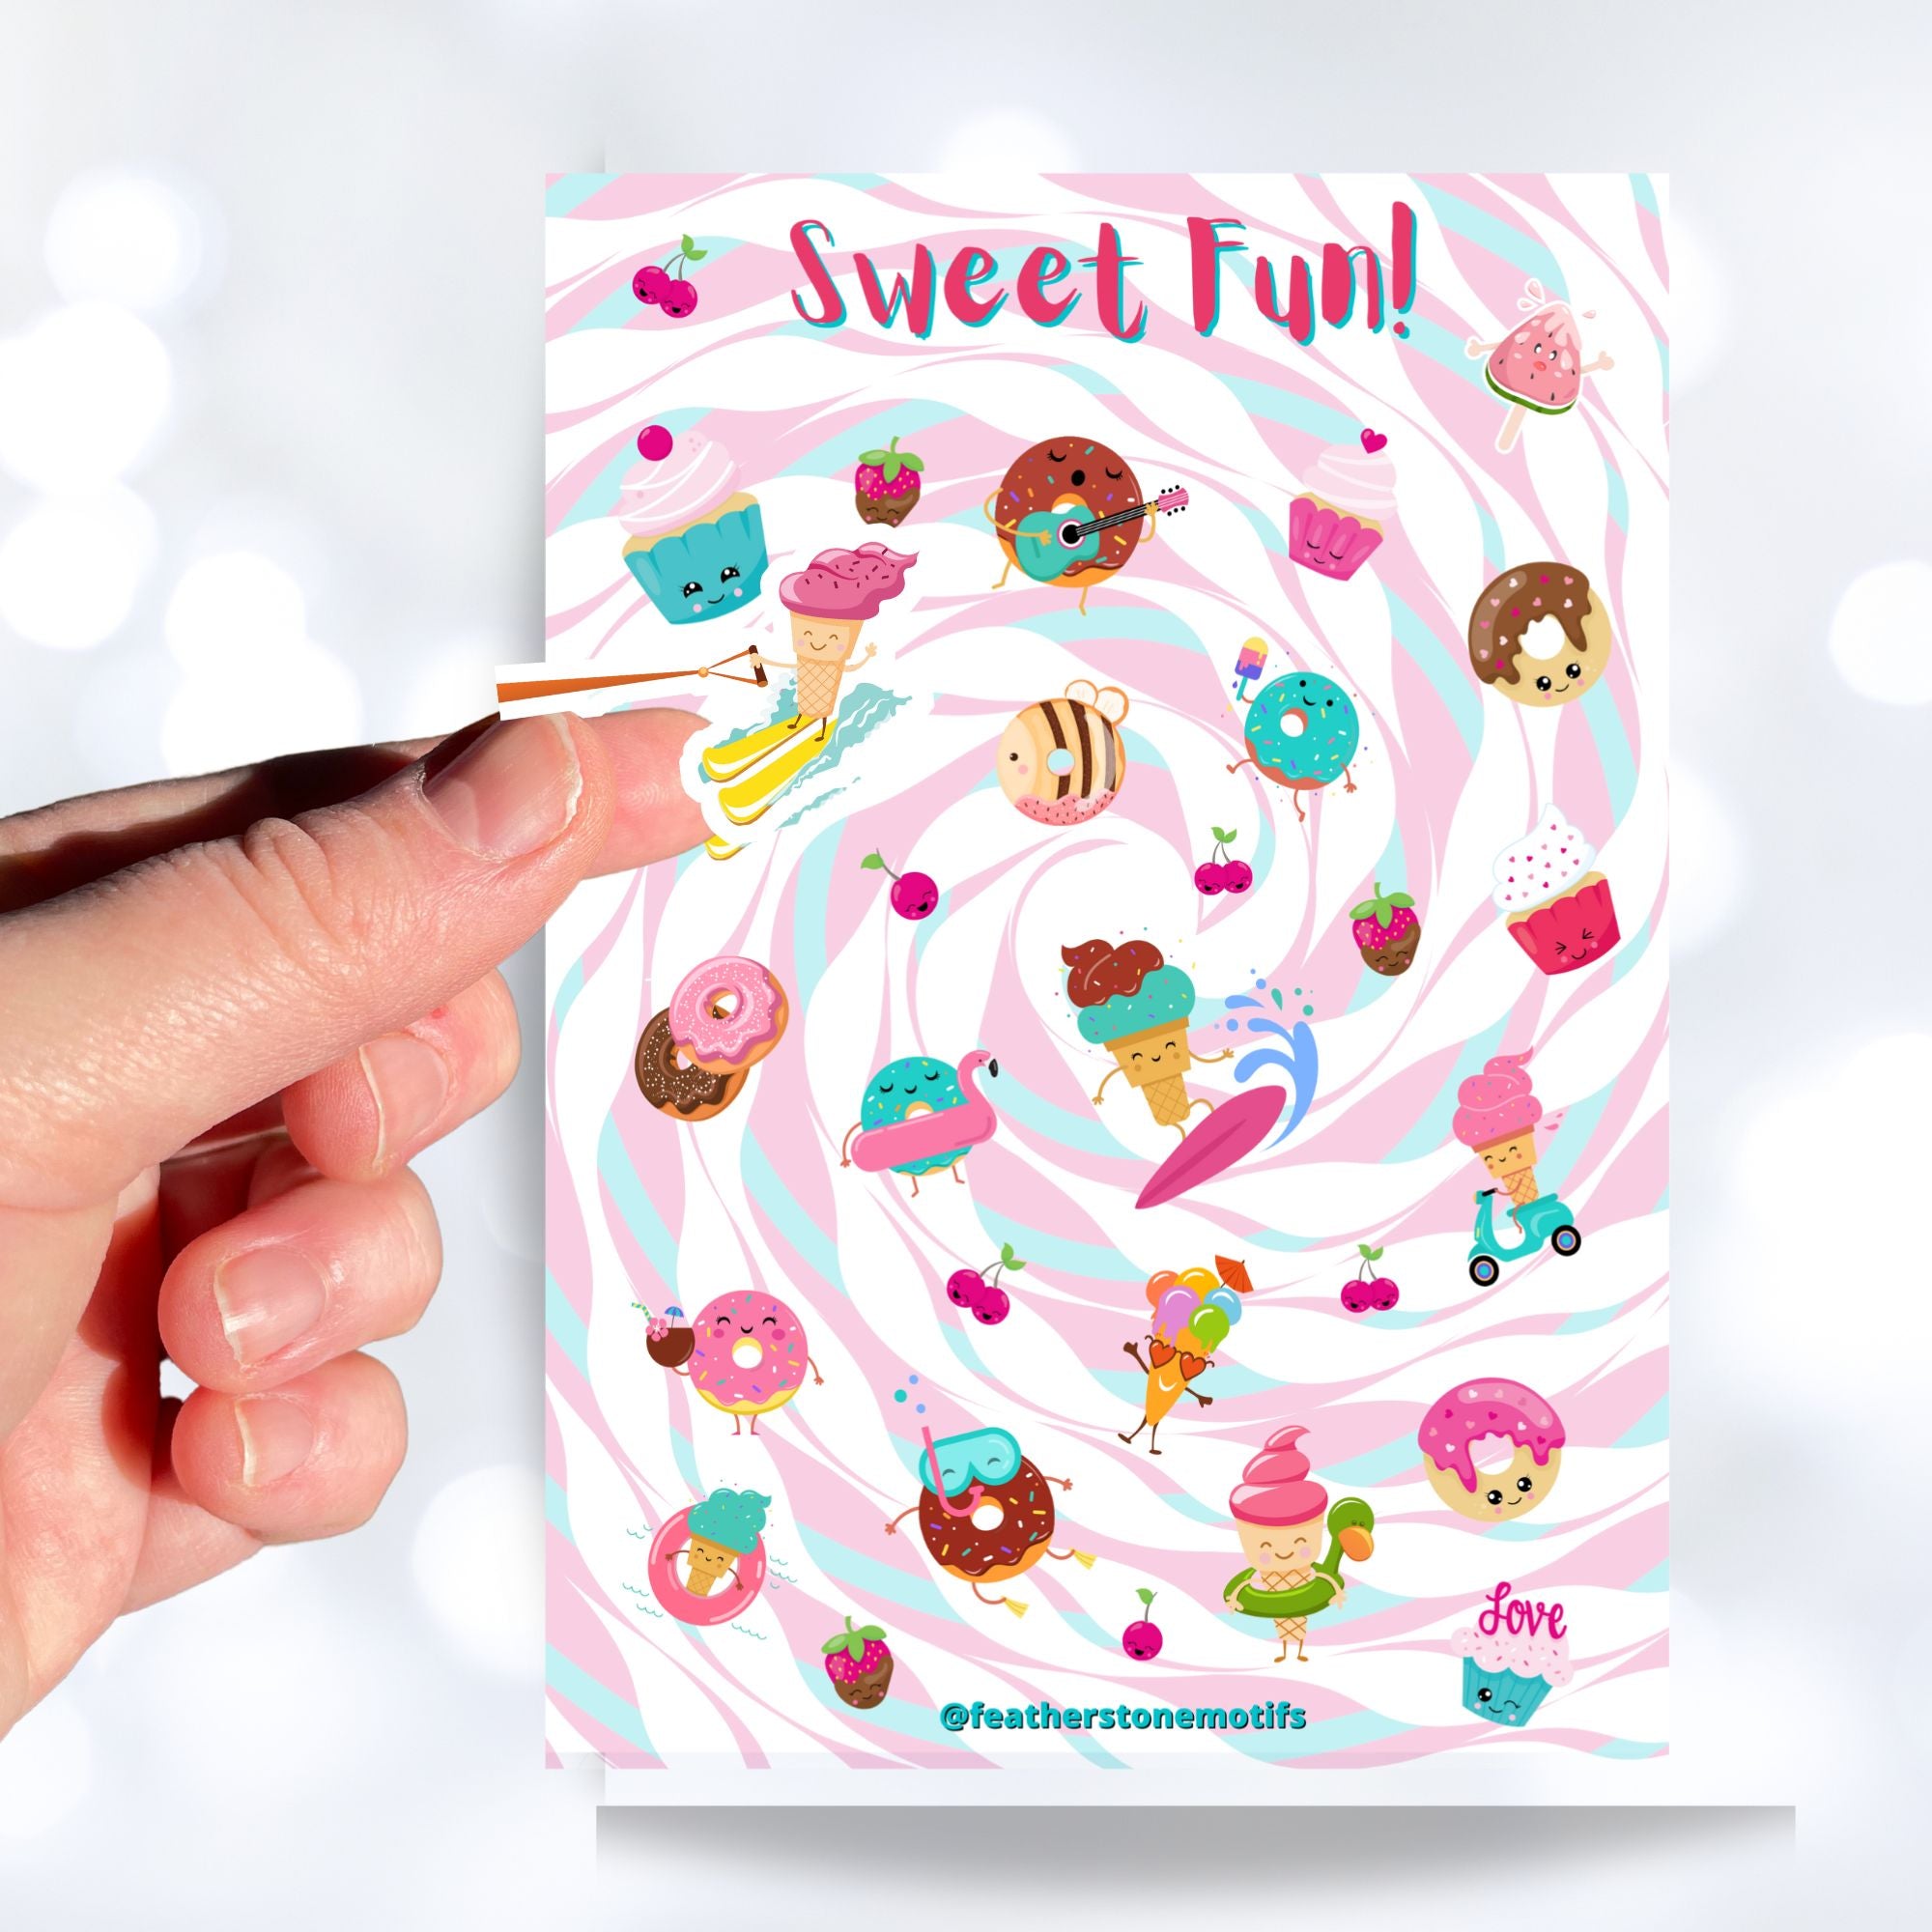 This sticker sheet is such Sweet Fun! It features cartoon characters of all your favorite treats like ice cream, donuts, and cakes. Delicious! This image shows a hand holding a waterskiing ice cream cone above the Sweet Fun sticker sheet.